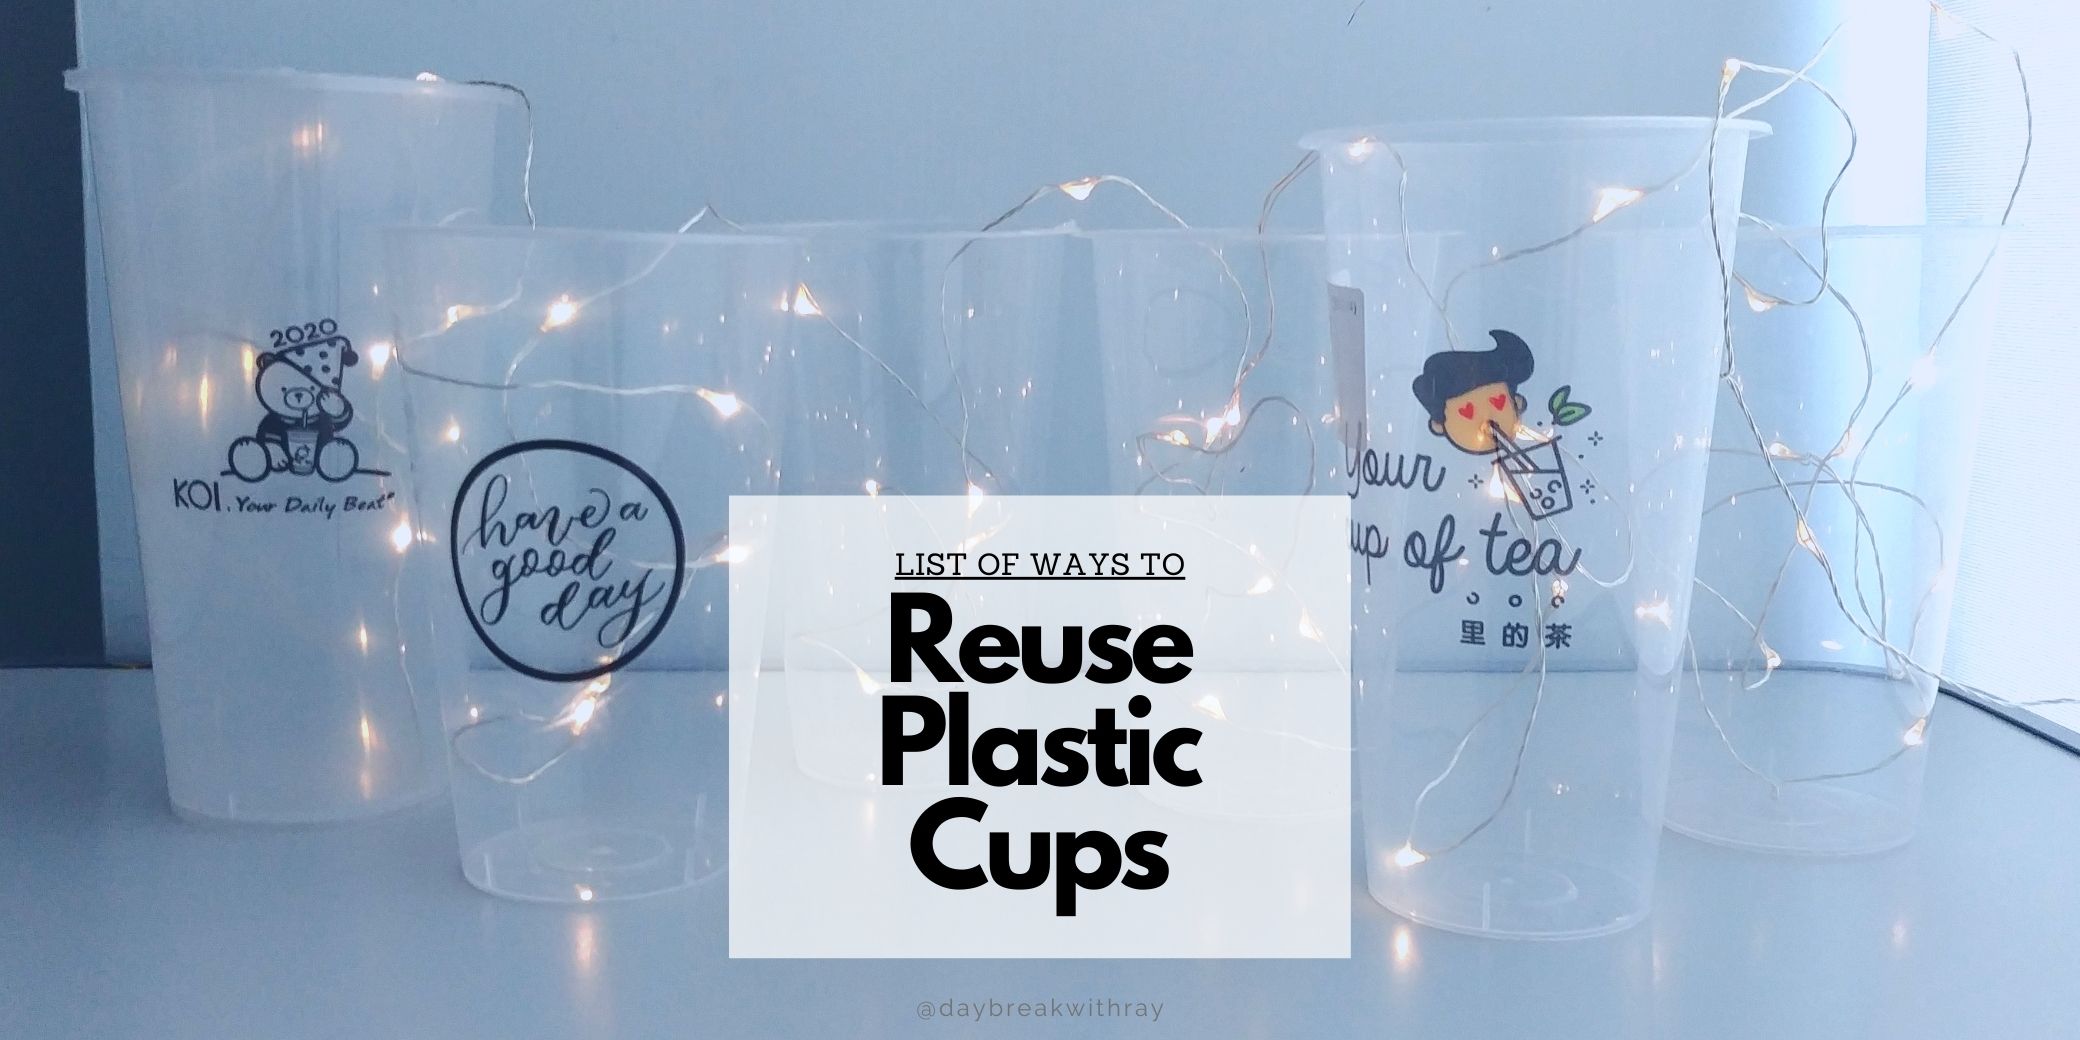 https://daybreakwithray.com/wp-content/uploads/2021/02/Featured-Image-Ways-to-Reuse-Plastic-Cups-from-Bubble-Tea.jpg